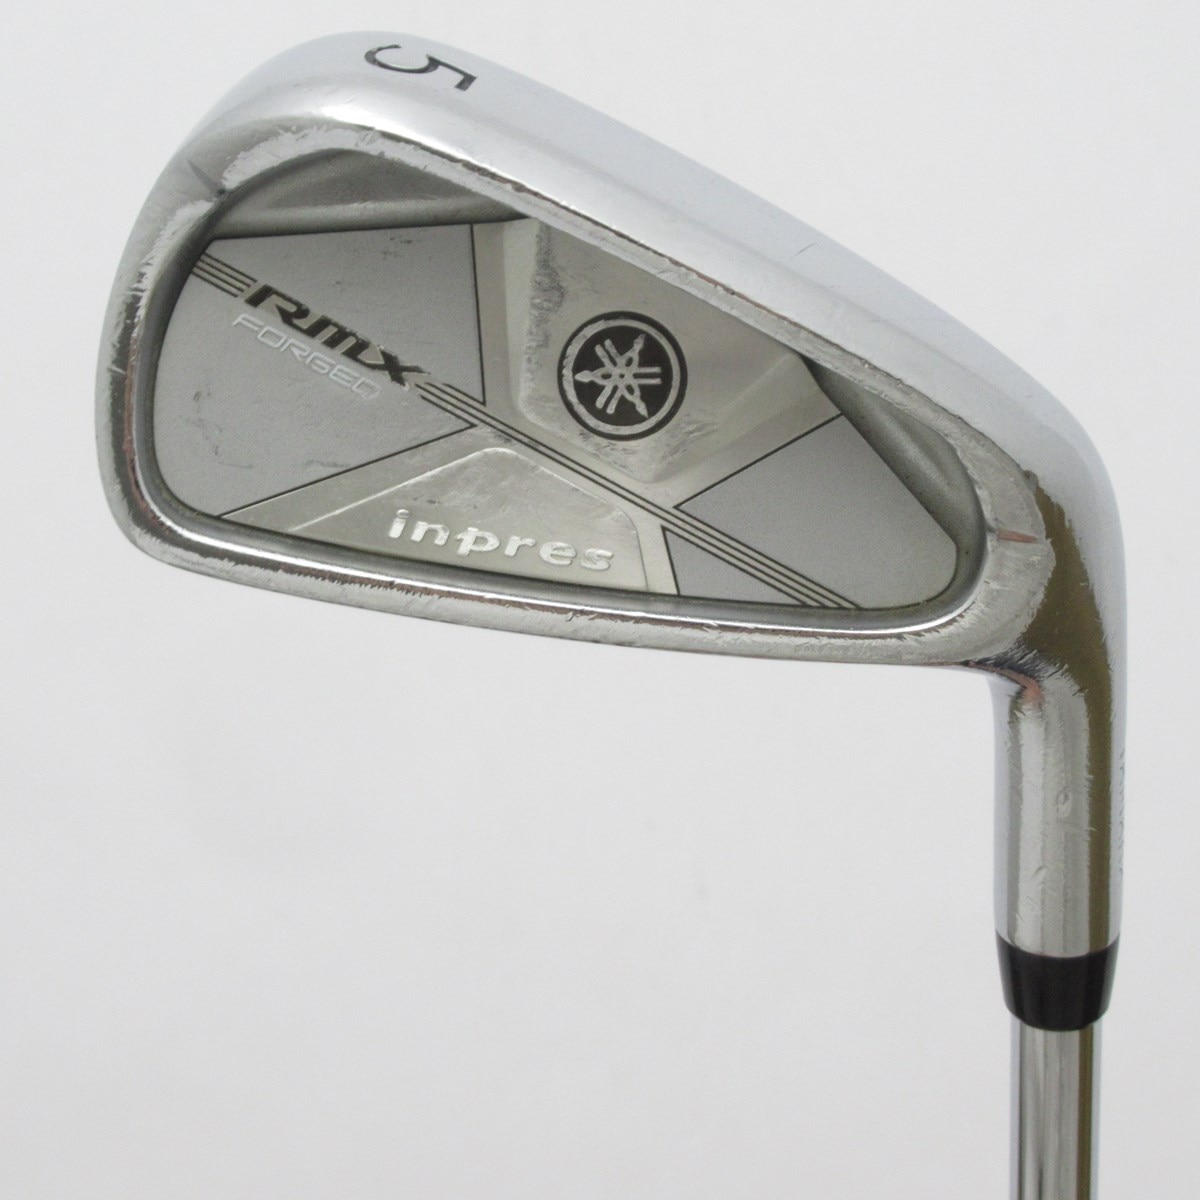 inpres RMX FORGED 中古アイアンセット ヤマハ inpres メンズ 右利き 